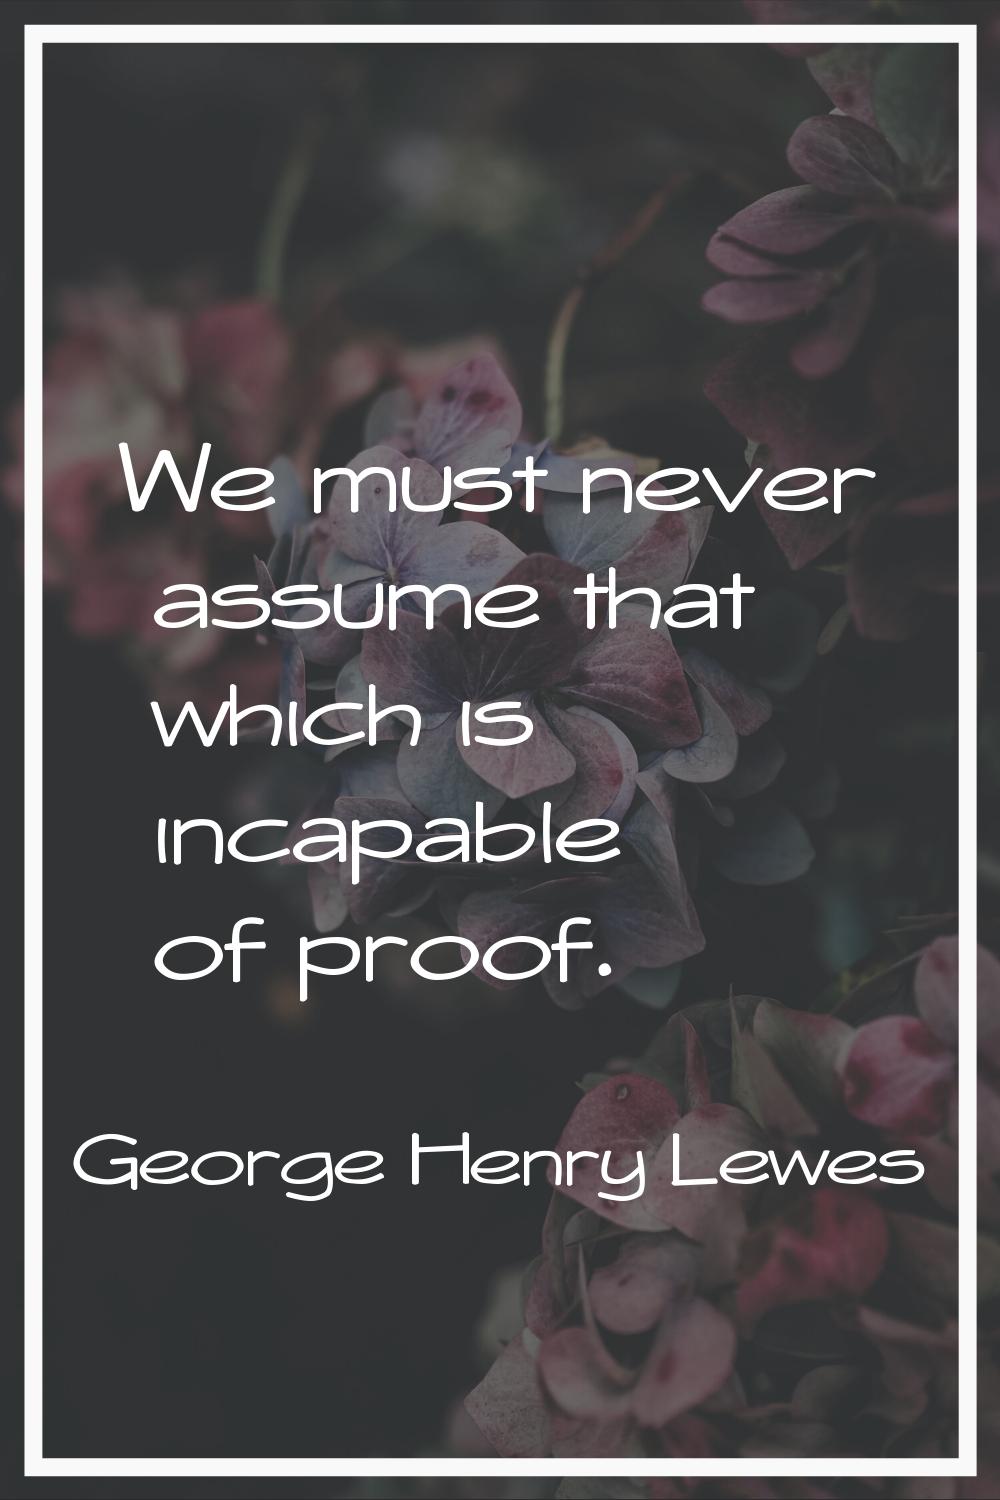 We must never assume that which is incapable of proof.